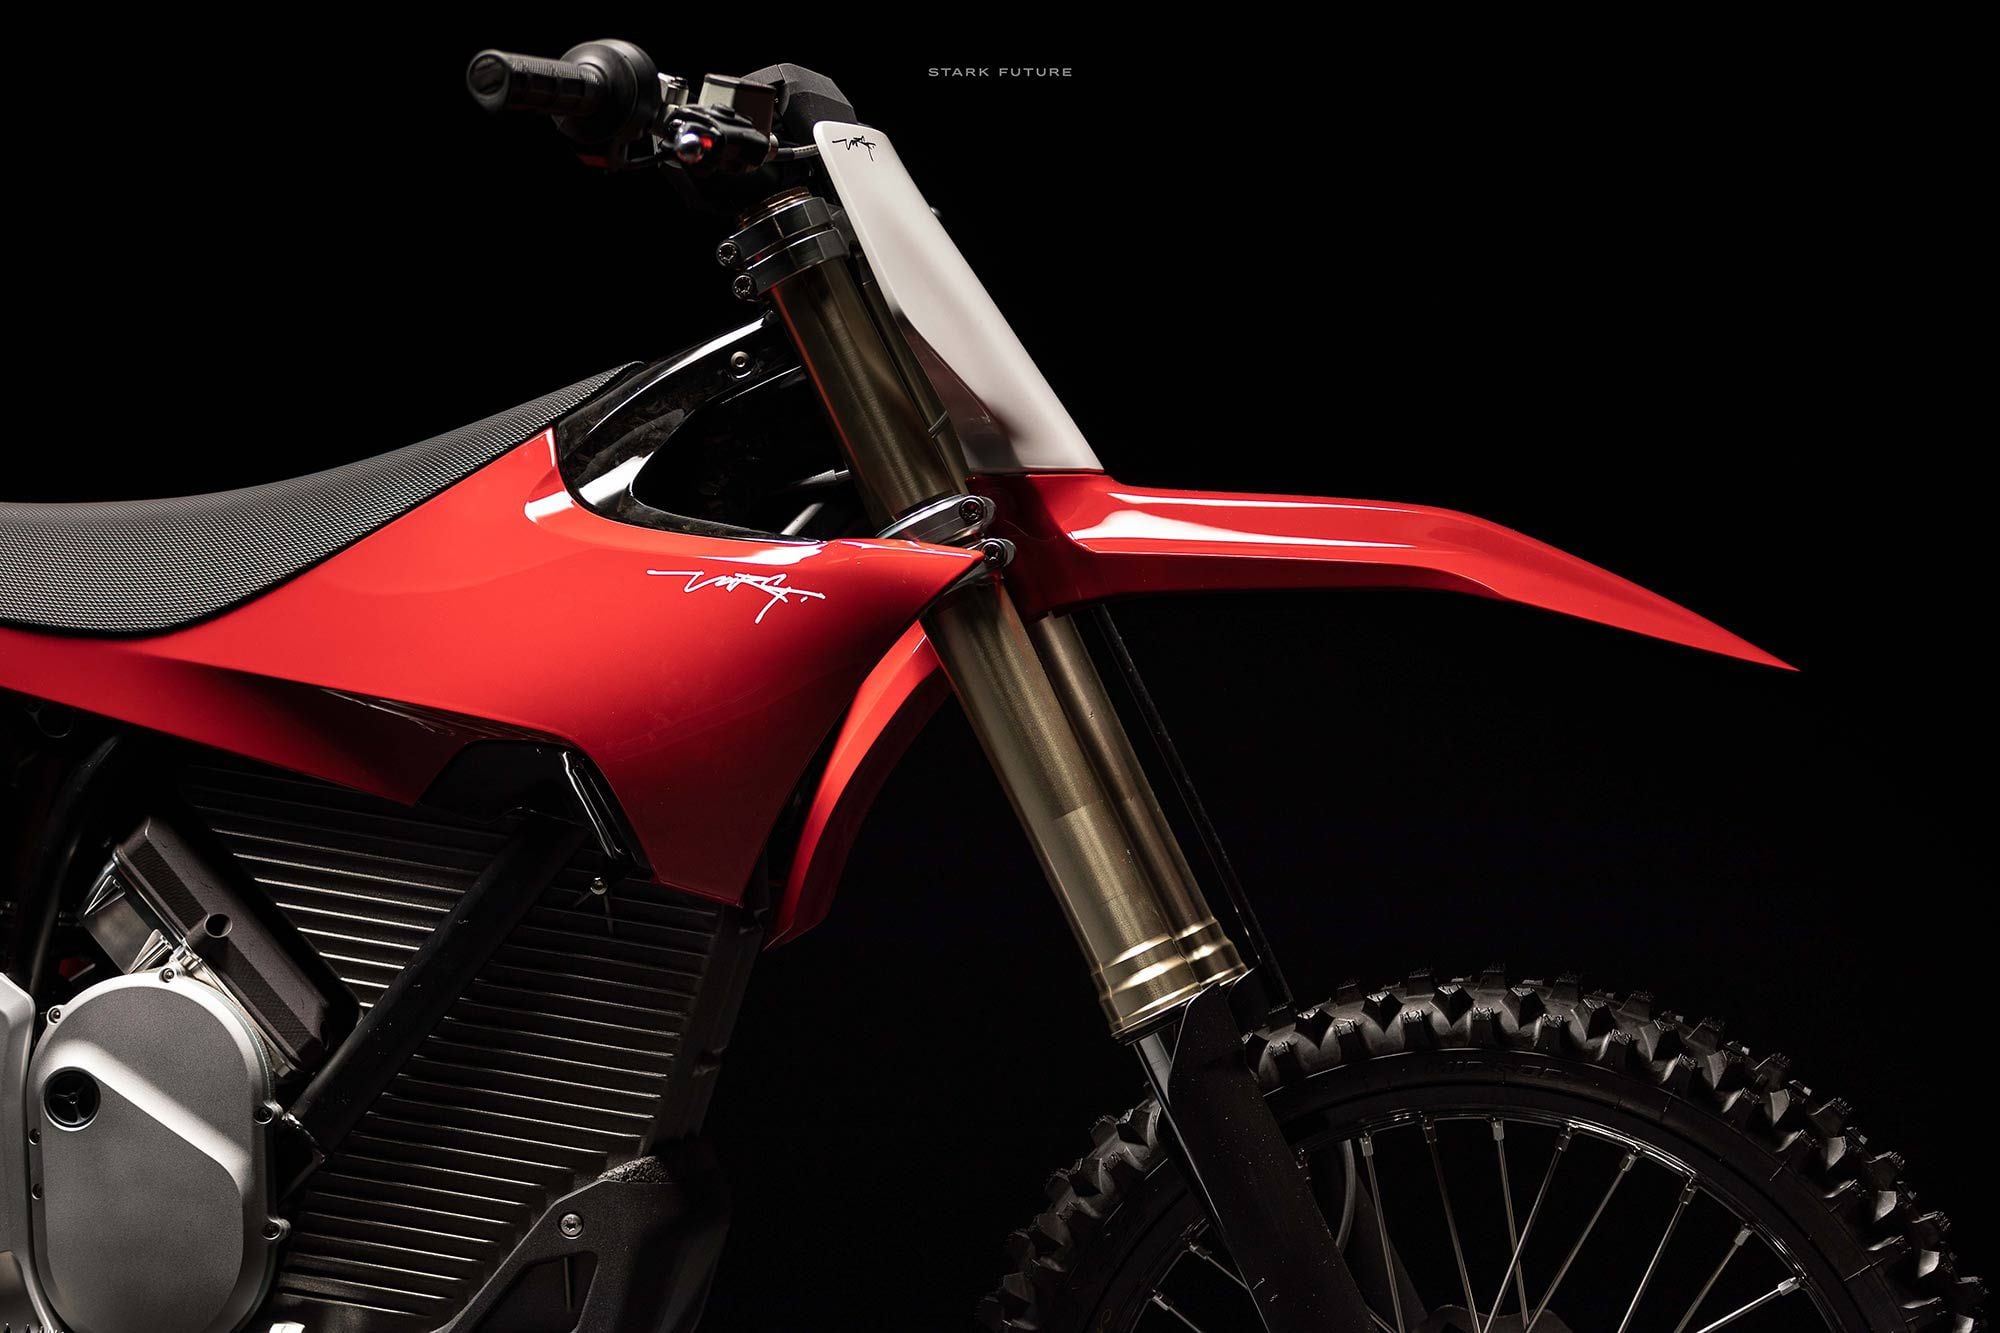 KYB provides the suspension components while Stark worked with Technical Touch to come up with settings. To simplify setup, there are seven stock settings the owner can choose. Note too the unique way the bodywork integrates with the frame, indicating a seamless rider-machine interface.